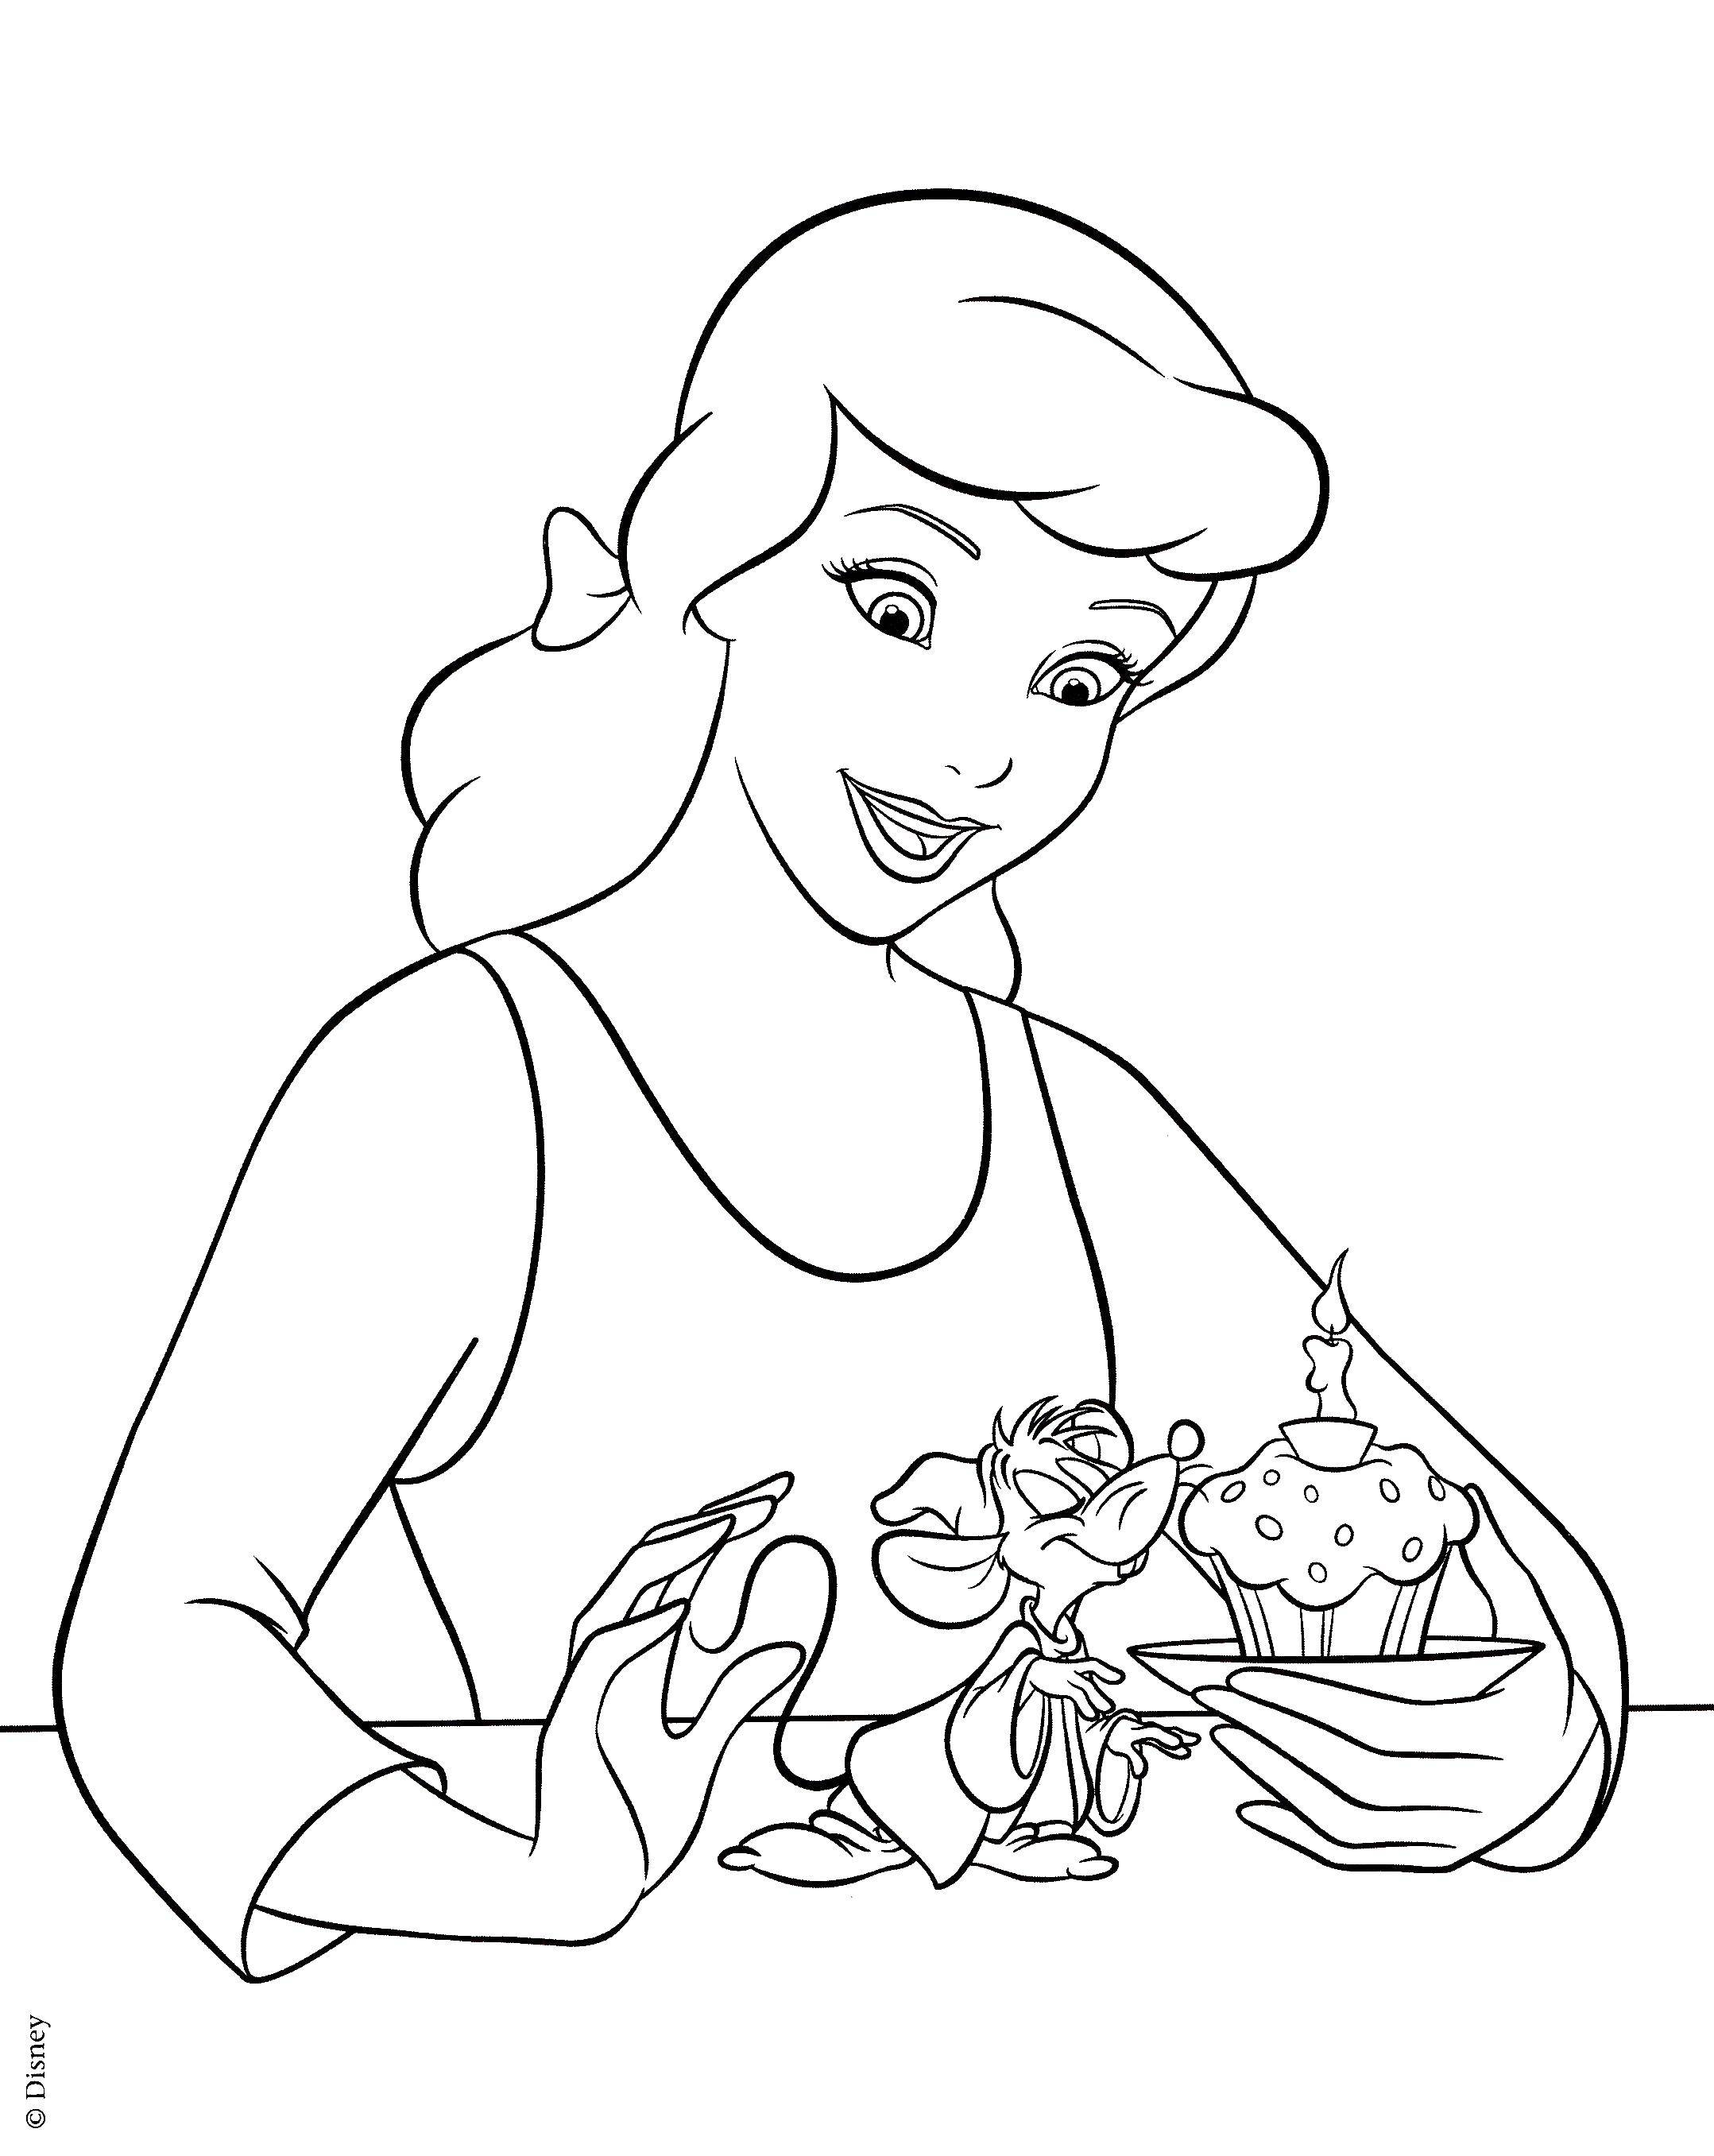 Coloring The Princess with the mouse. Category Princess. Tags:  princesses, cartoons, tales, mouse.